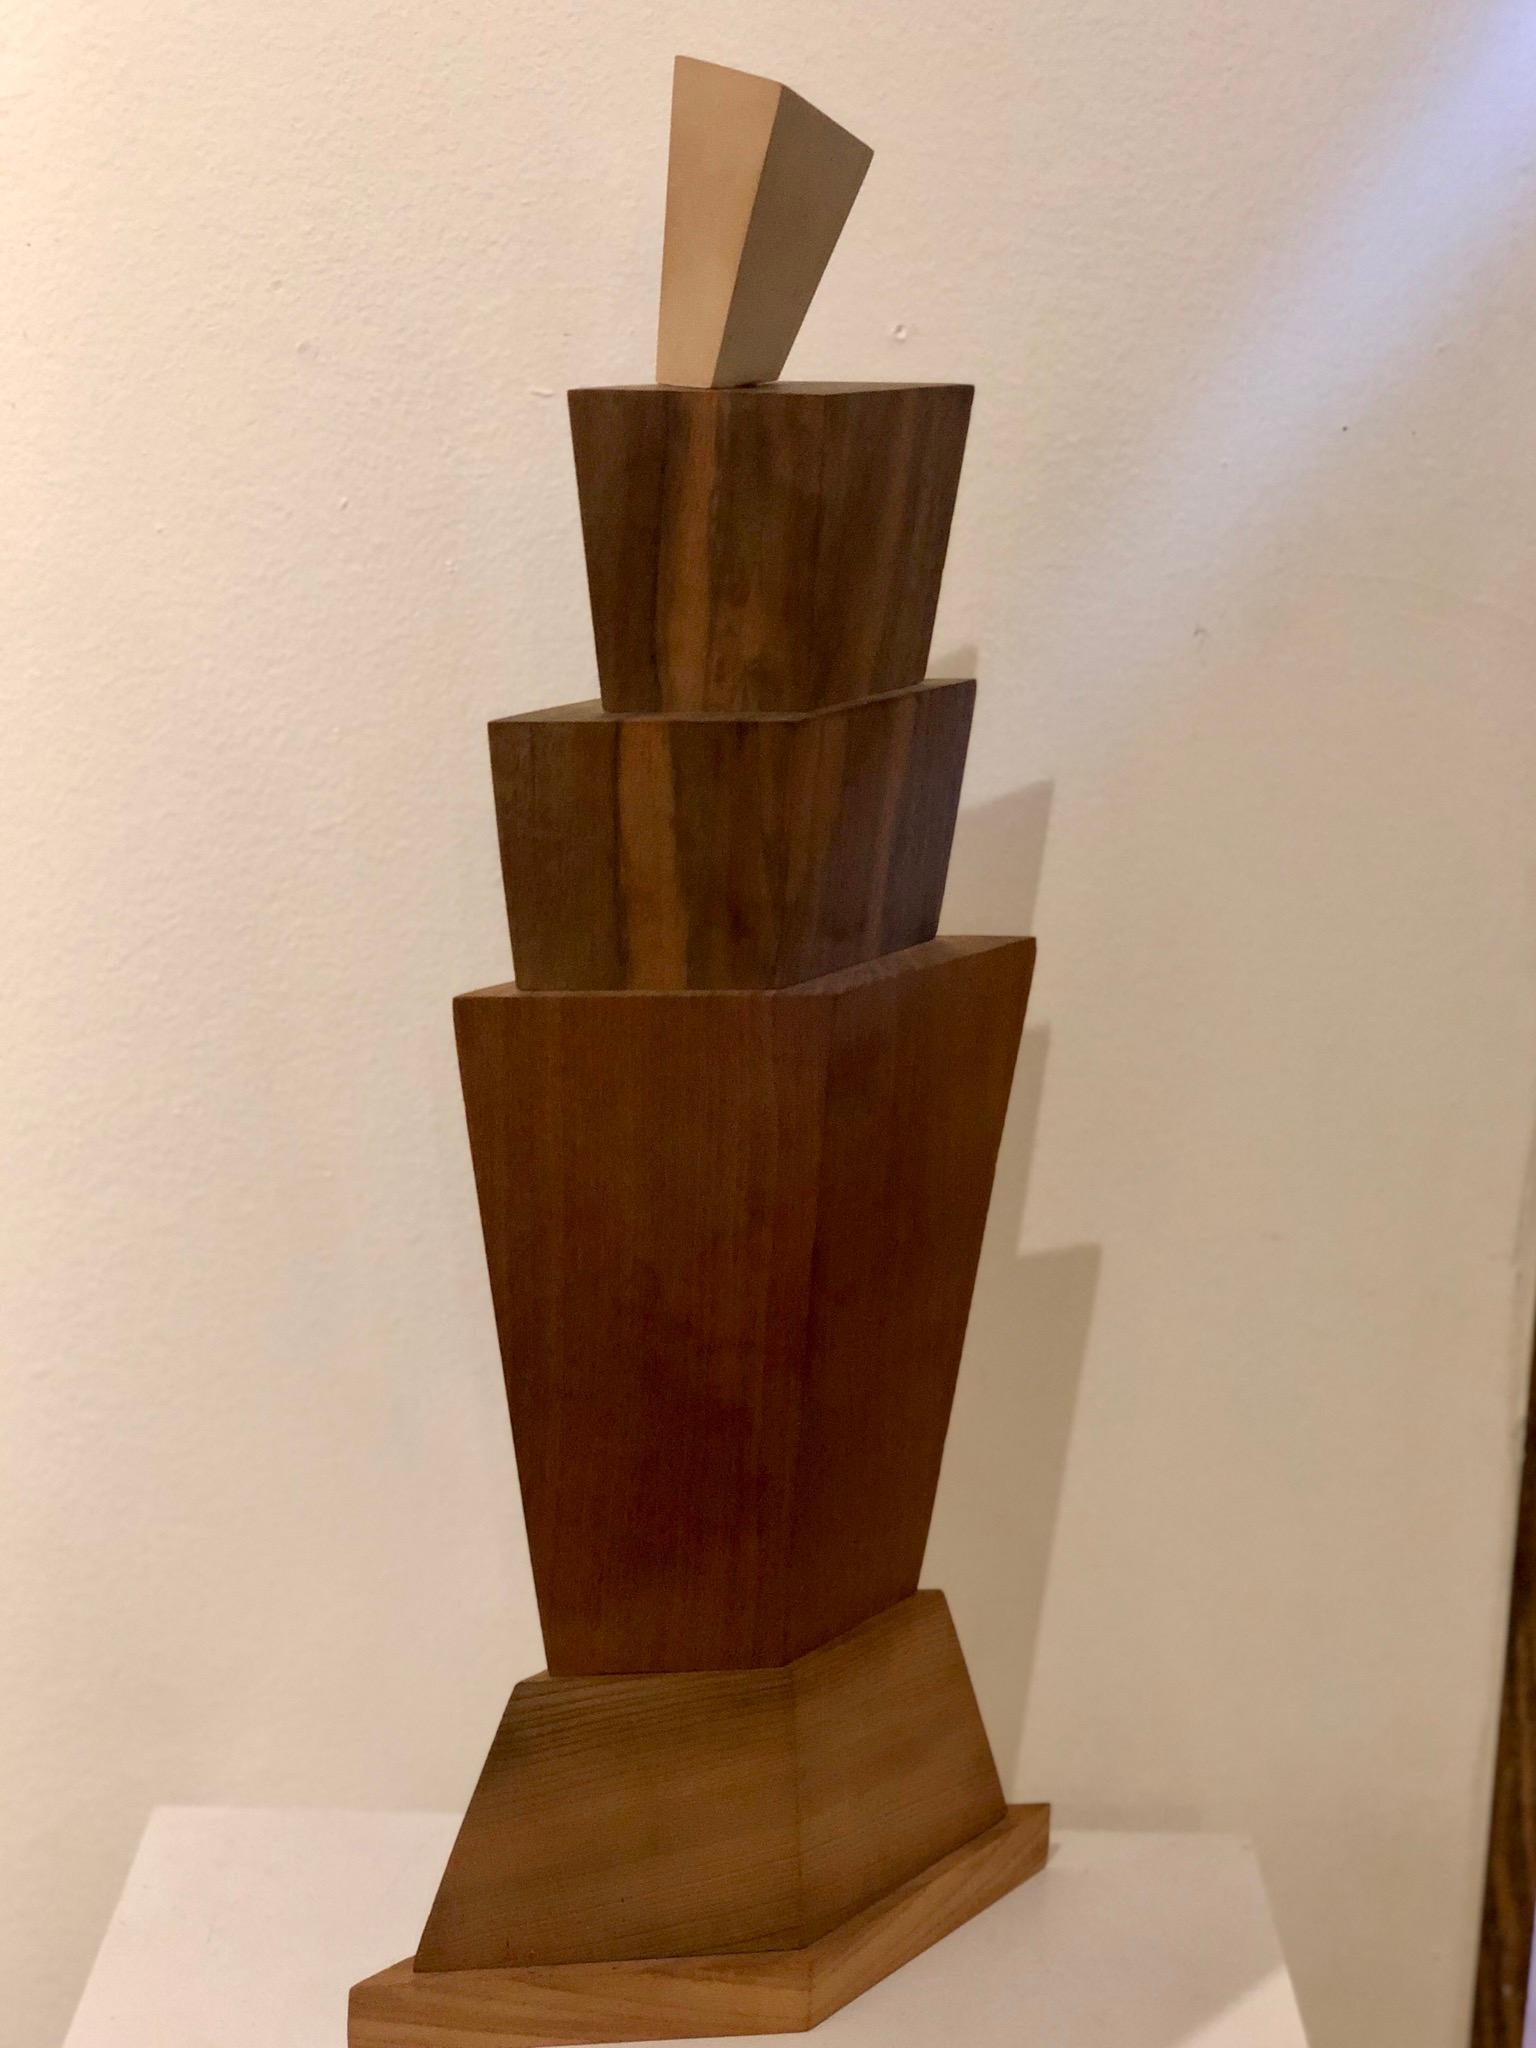 Well done sculpture by Listed artist John Rogers, circa 2003 signed and dated, in mix woods, Mahogany, walnut birch. Born in Des Moines, Iowa. John soon moved with his parents to Duluth, Minnesota, Great Falls, Montana
and then to La Crosse,